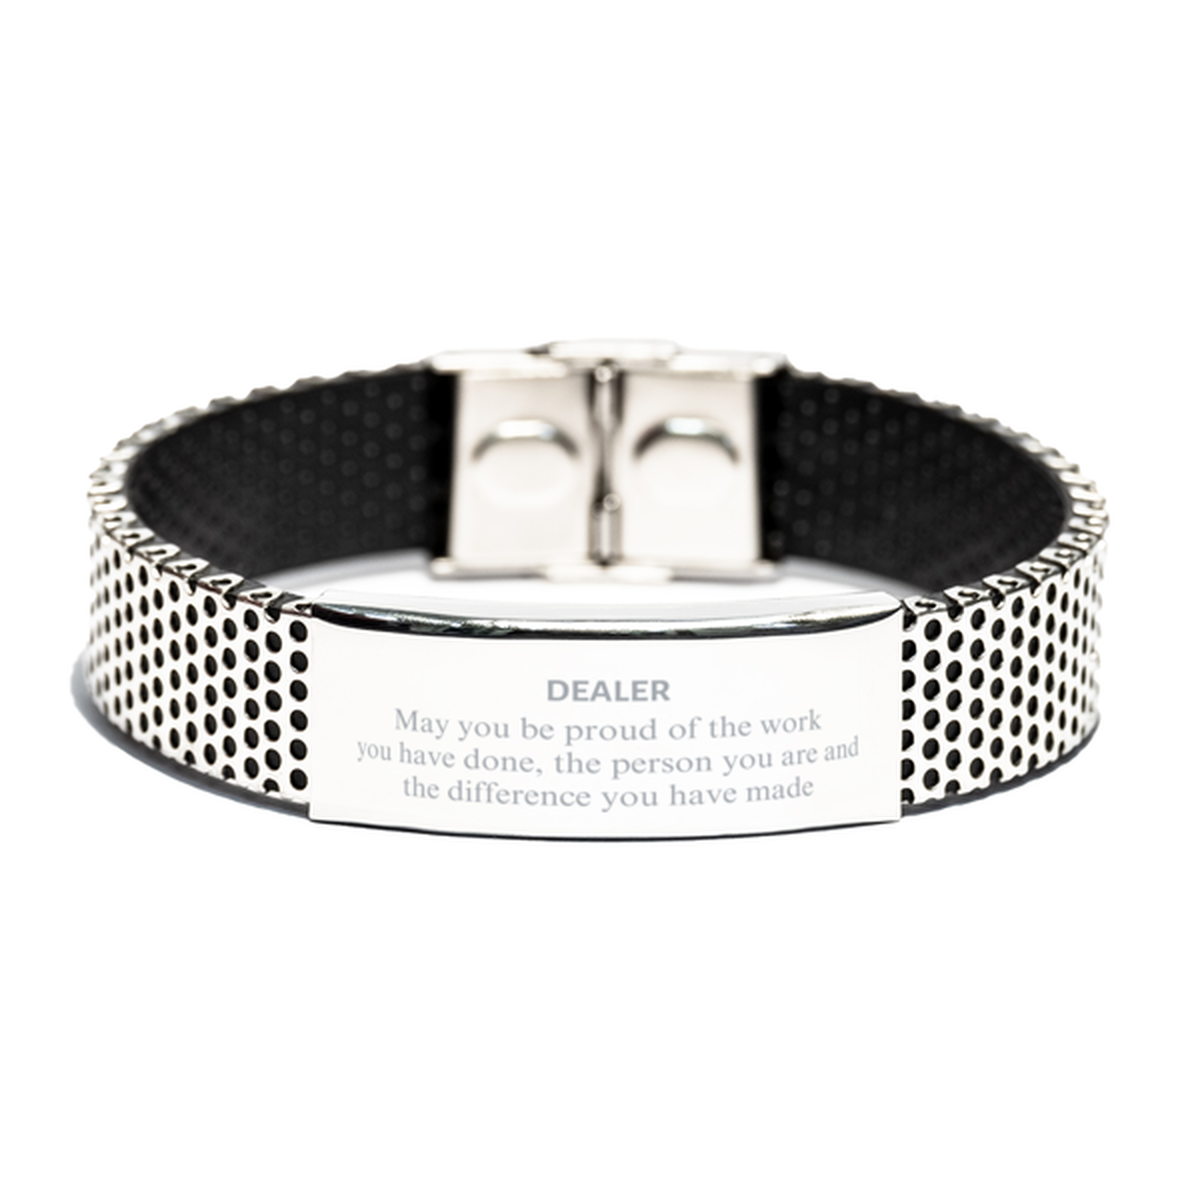 Dealer May you be proud of the work you have done, Retirement Dealer Stainless Steel Bracelet for Colleague Appreciation Gifts Amazing for Dealer